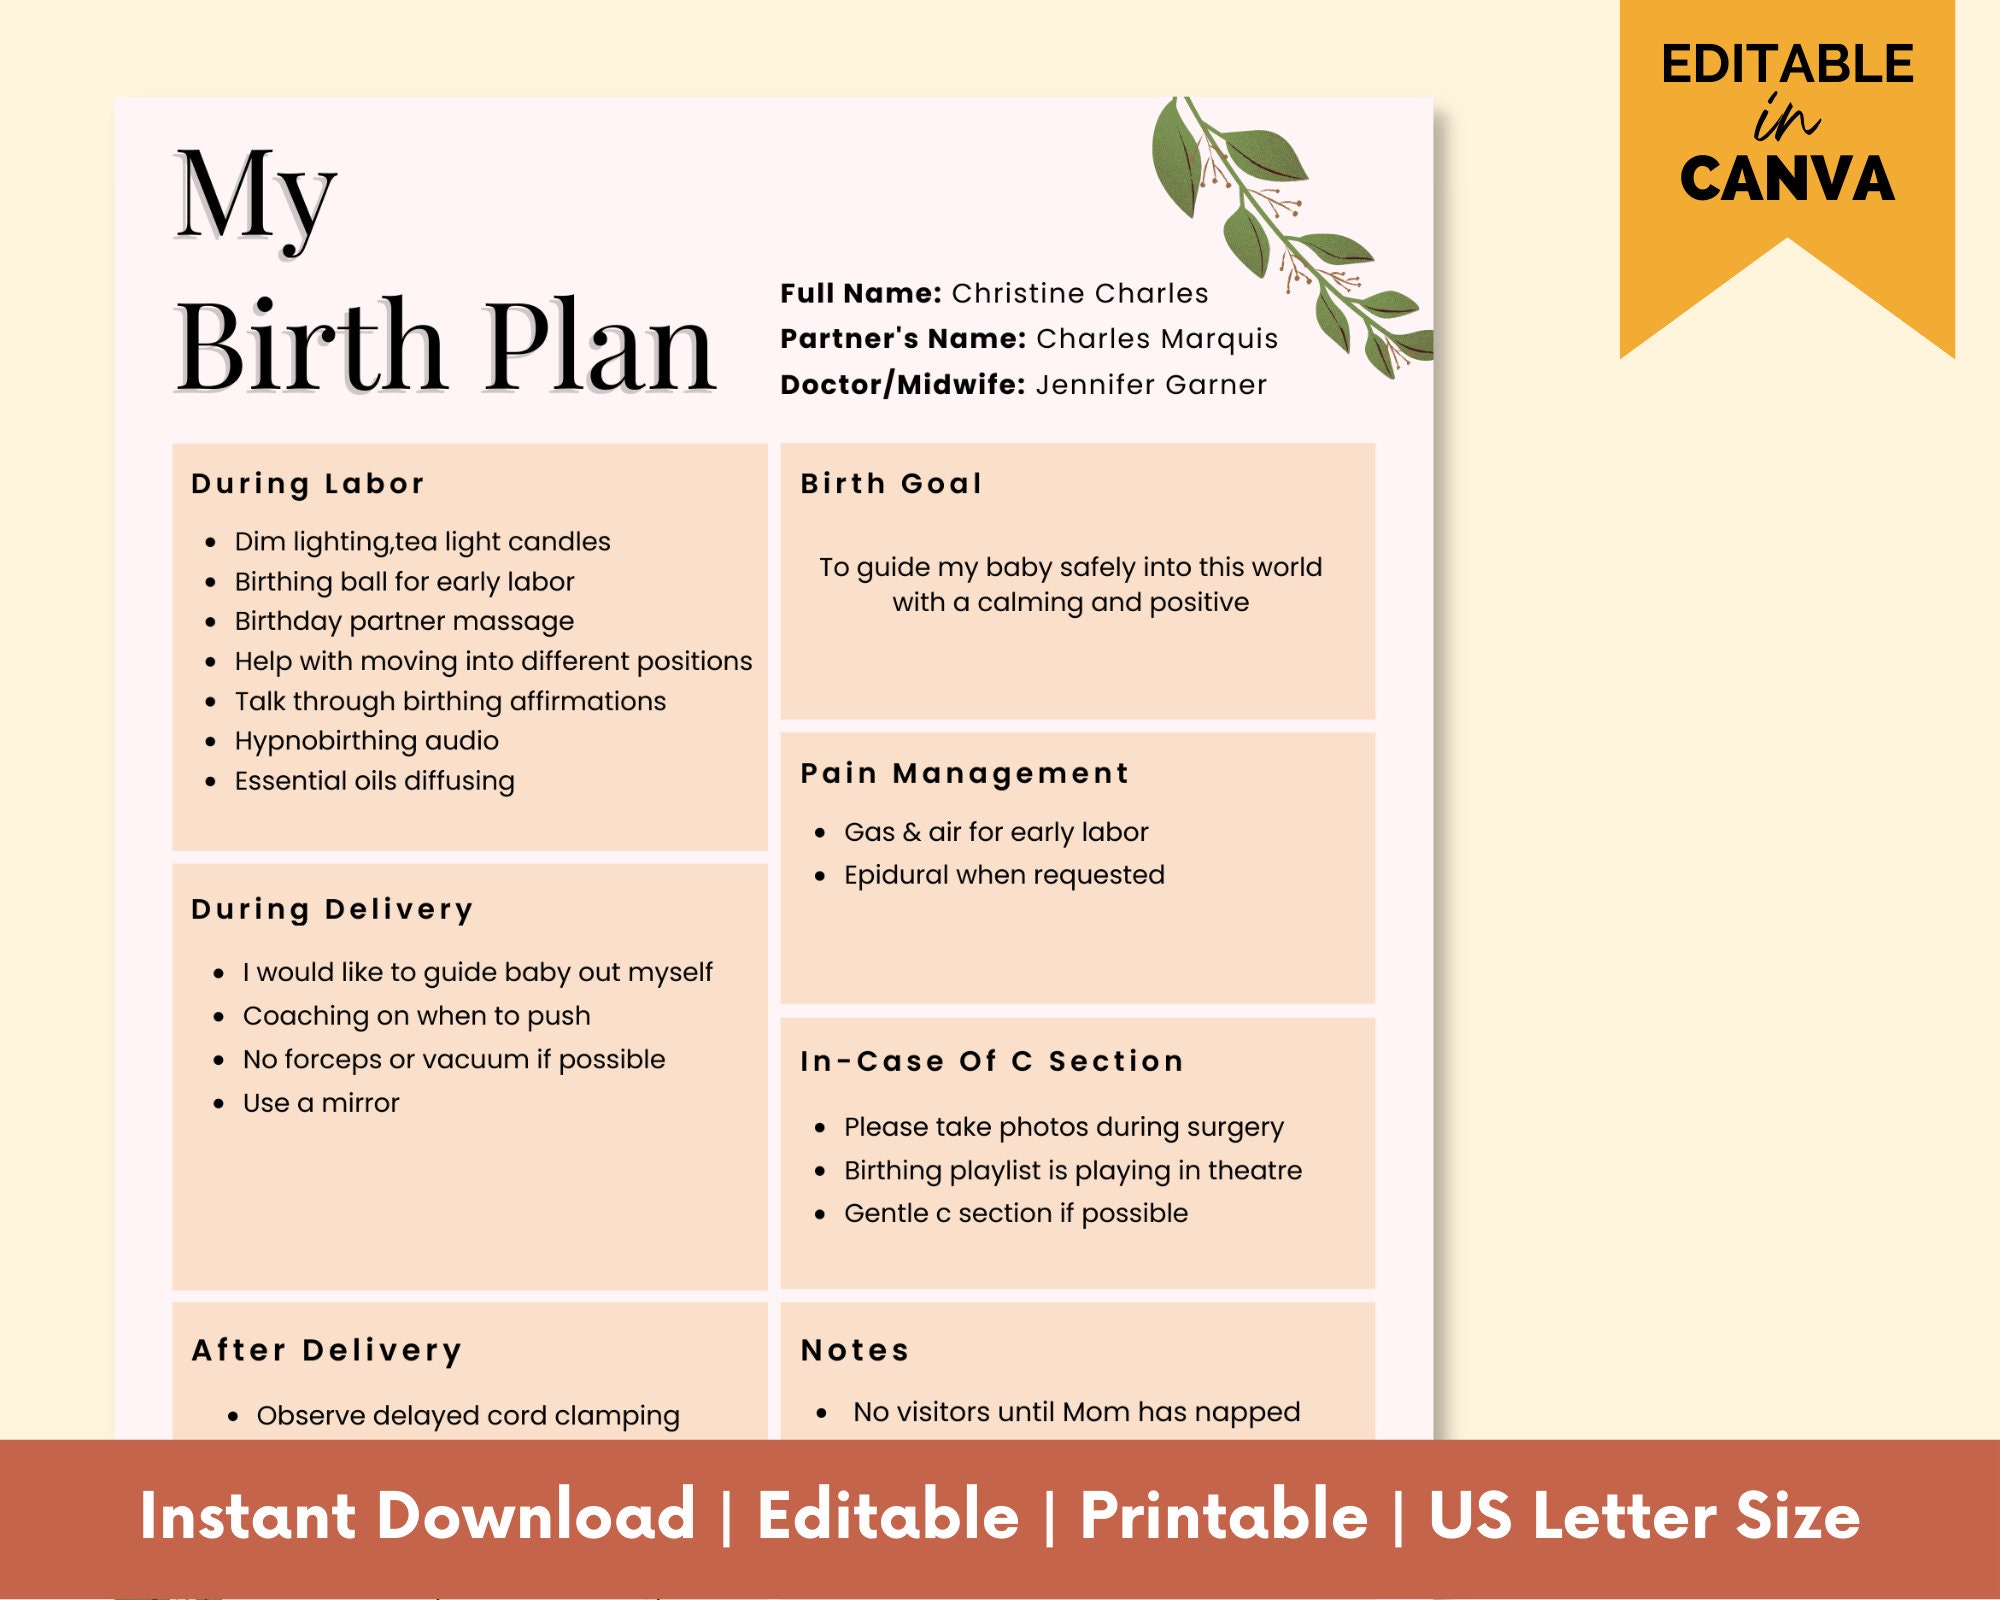 Making a birth plan - what to include, purpose, benefits